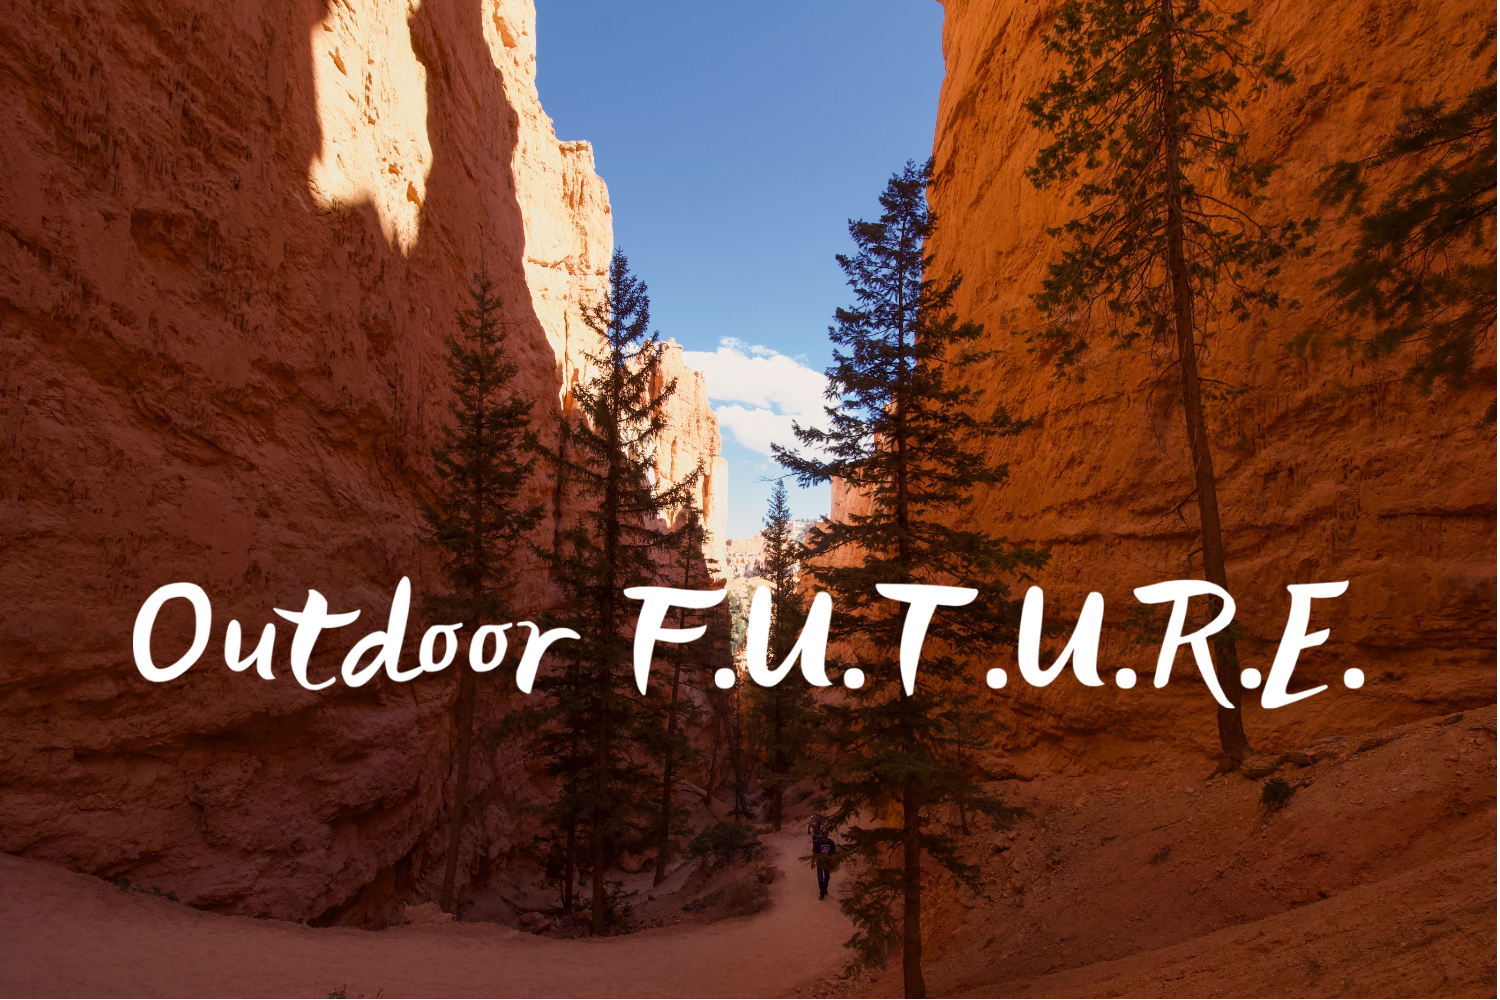 Outdoor FUTURE photo by Leslie Cross